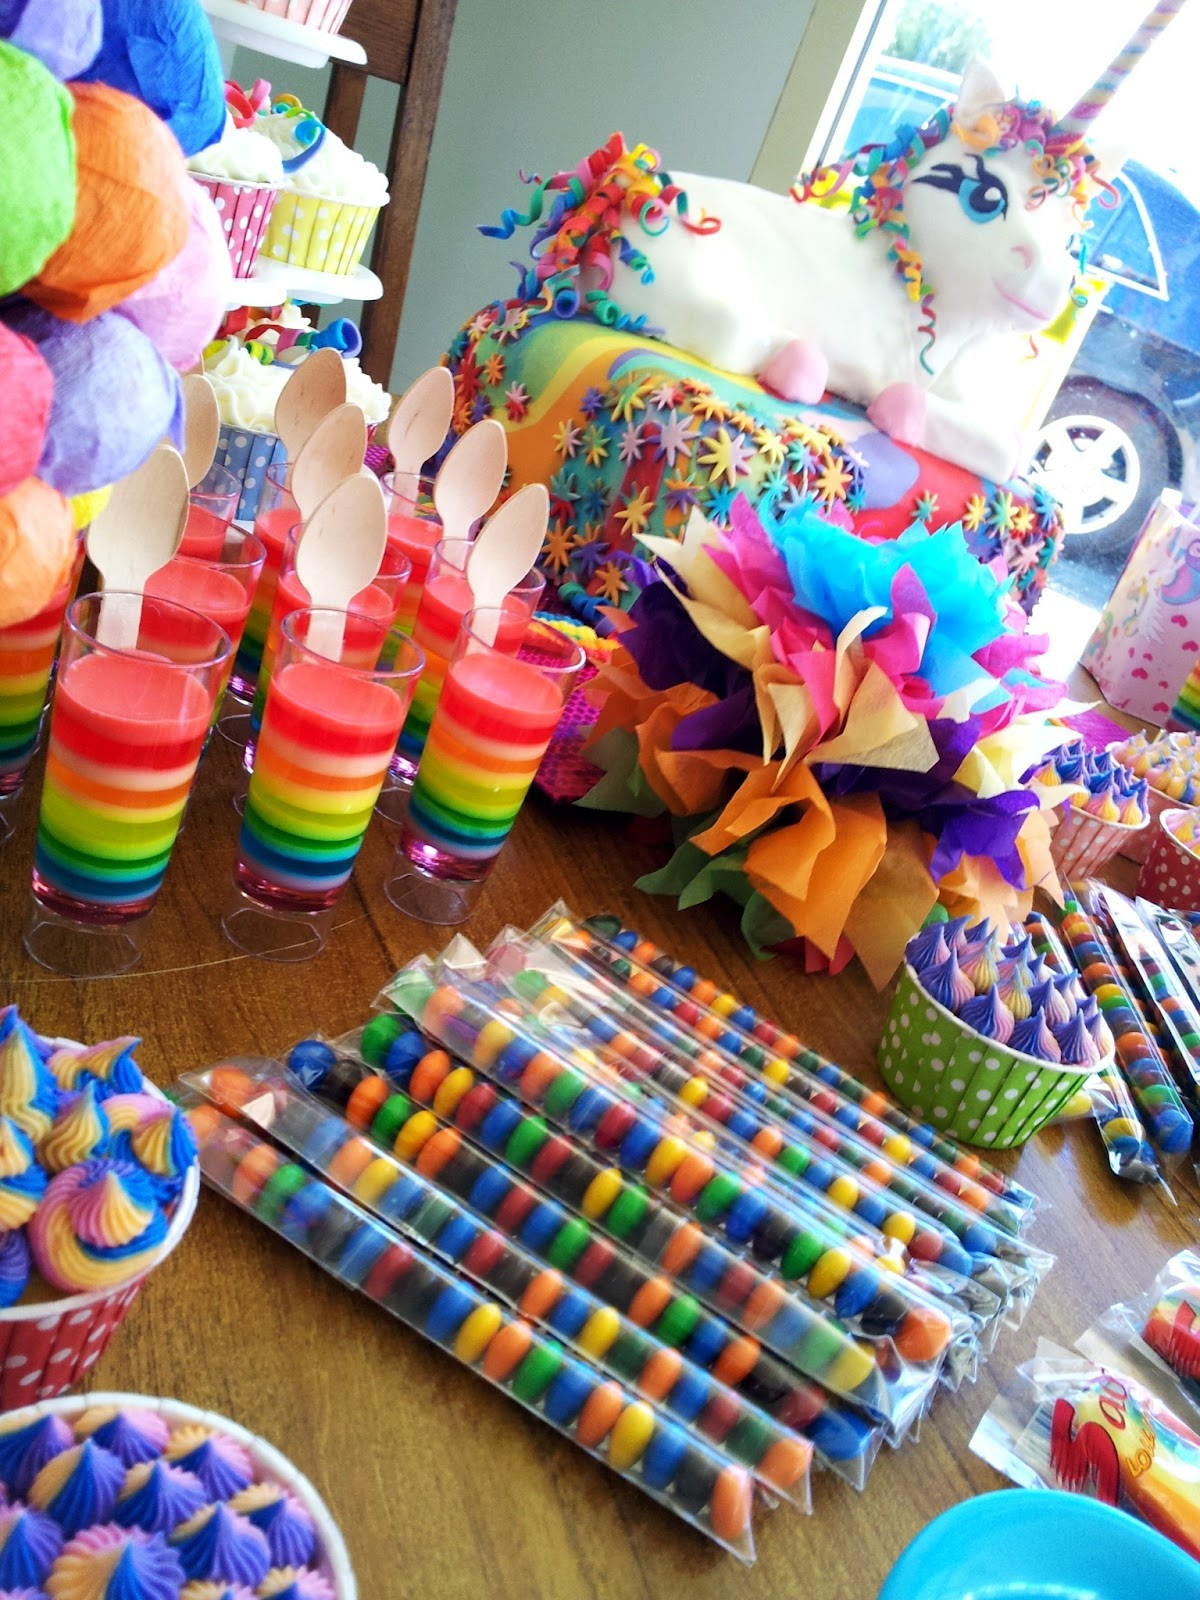 Rainbow Unicorn Party Ideas
 The Quick Unpick Five FIVE A party rainbows and a